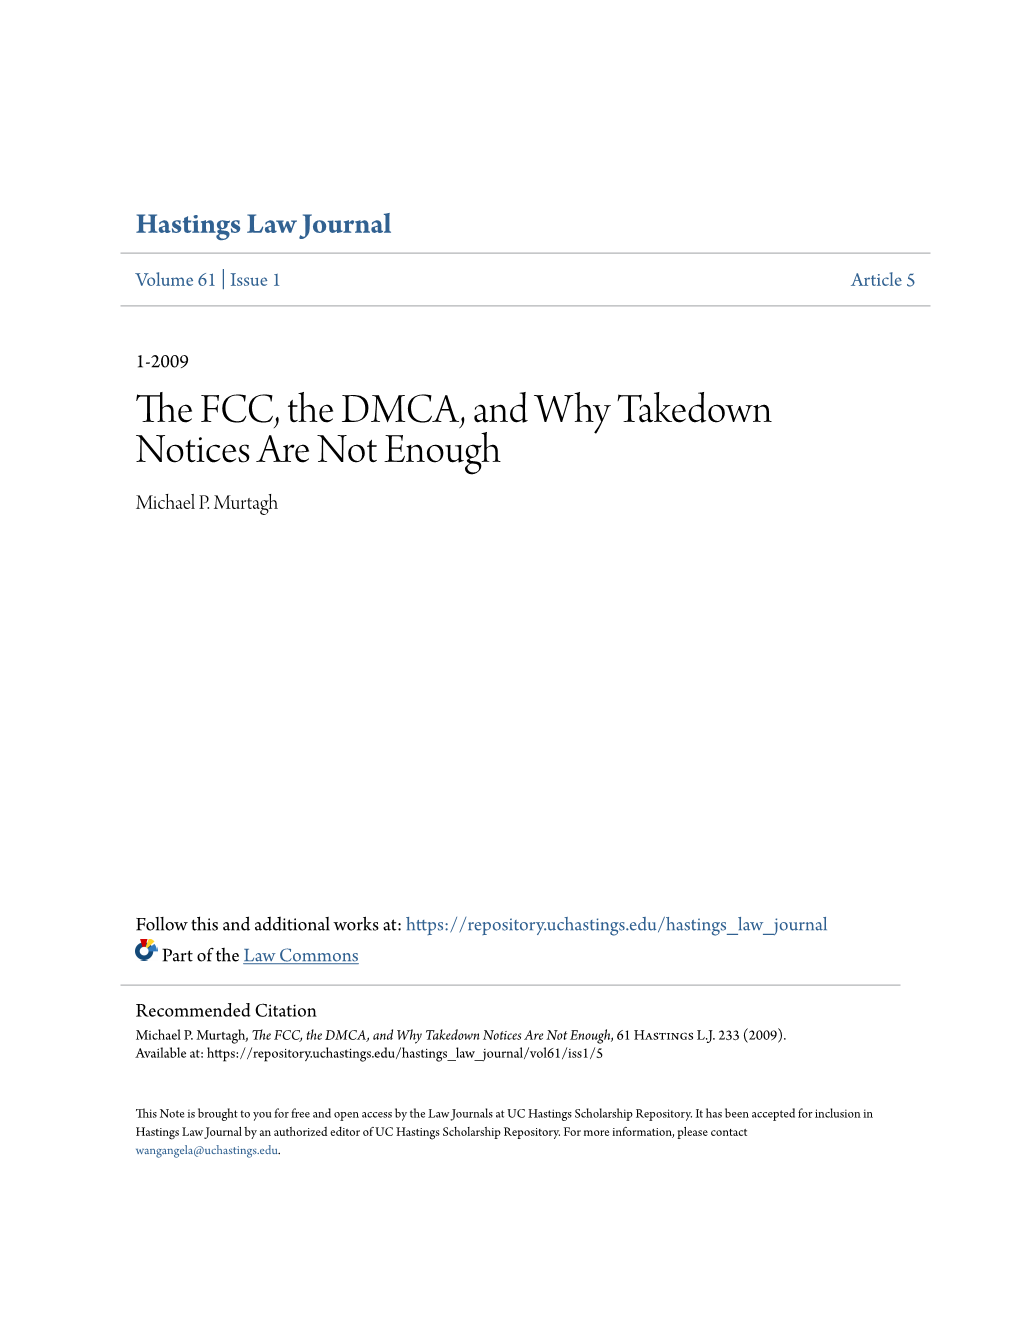 The FCC, the DMCA, and Why Takedown Notices Are Not Enough, 61 Hastings L.J